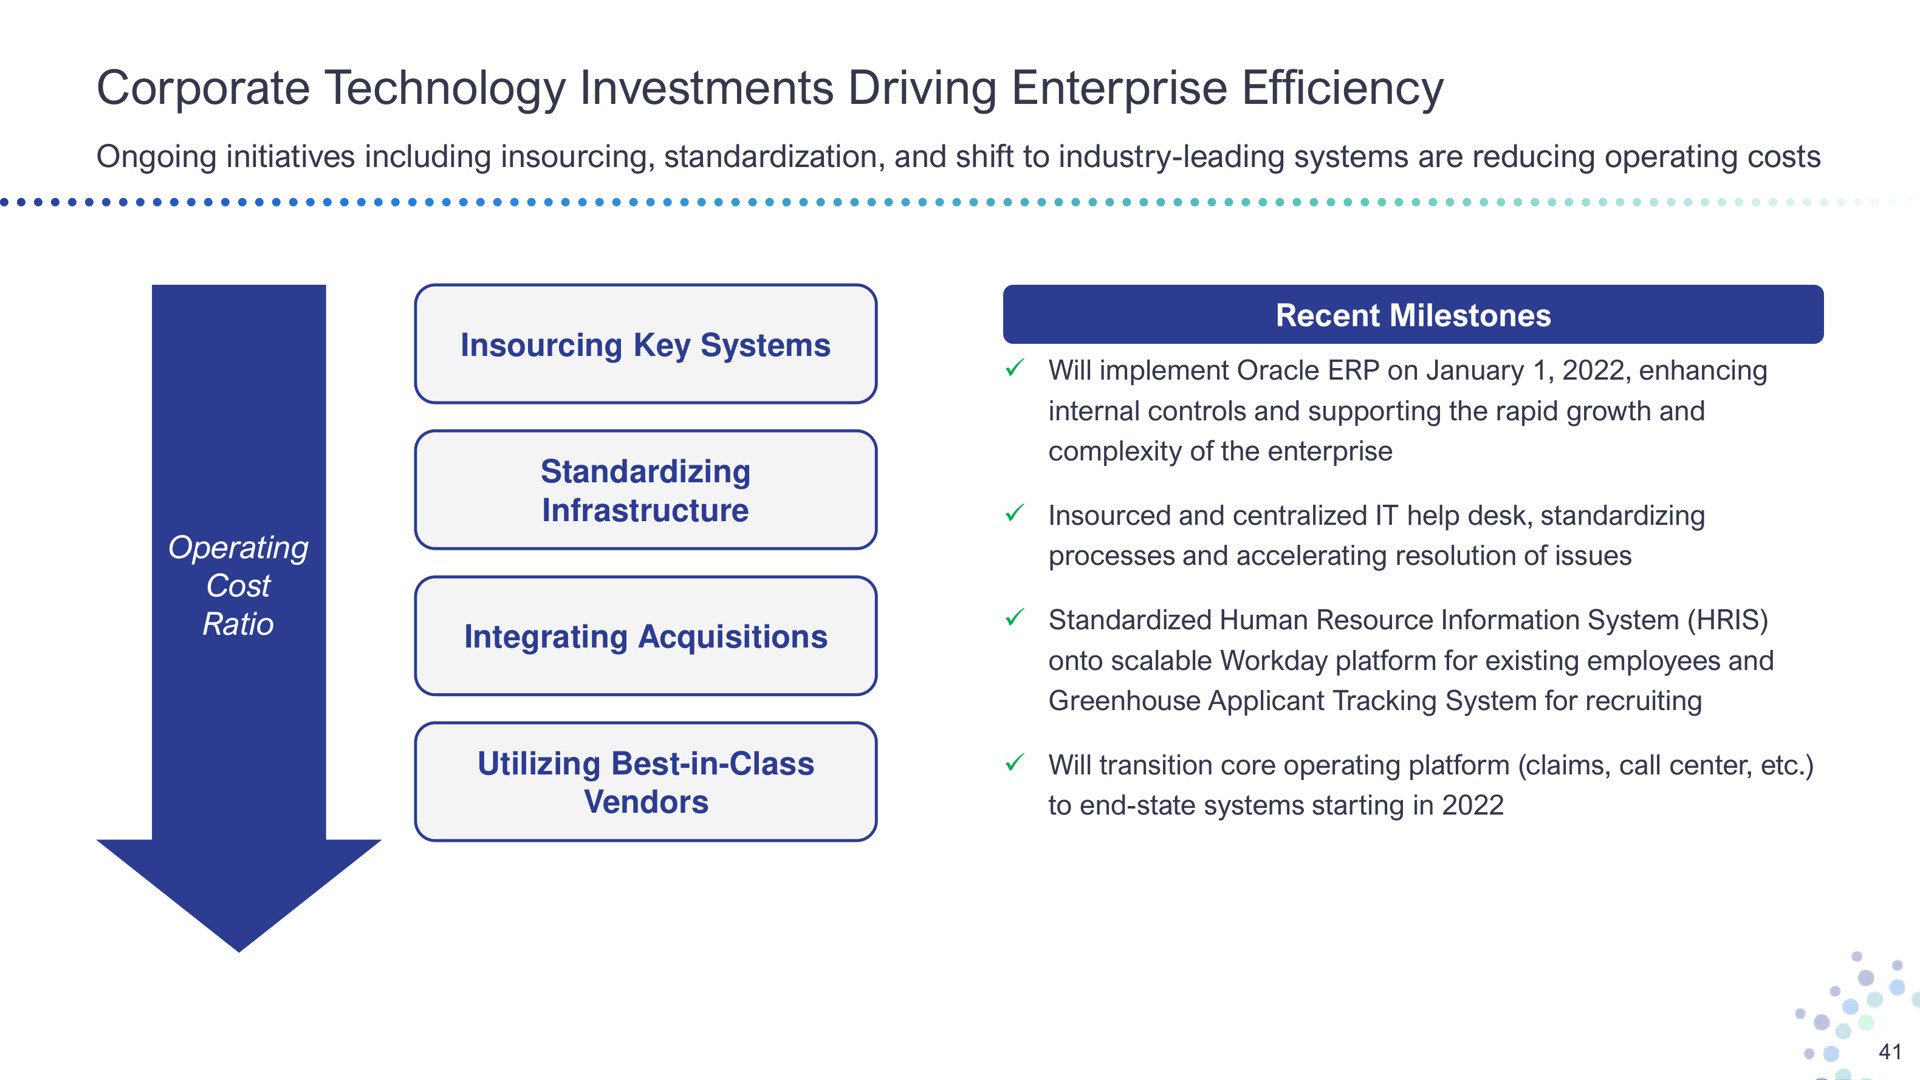 corporate technology investments driving enterprise efficiency ongoing initiatives including standardization and shift to industry leading systems are reducing operating costs key systems standardizing infrastructure integrating acquisitions of i cost ratio recent milestones will implement oracle on enhancing internal controls and supporting the rapid growth and complexity of the and centralized it help desk standardizing processes and accelerating resolution of issues standardized human resource information system onto scalable workday platform for existing employees and greenhouse applicant tracking system for recruiting utilizing best in class vendors will transition core operating platform claims call center to end state systems starting in i | Bright Health Group